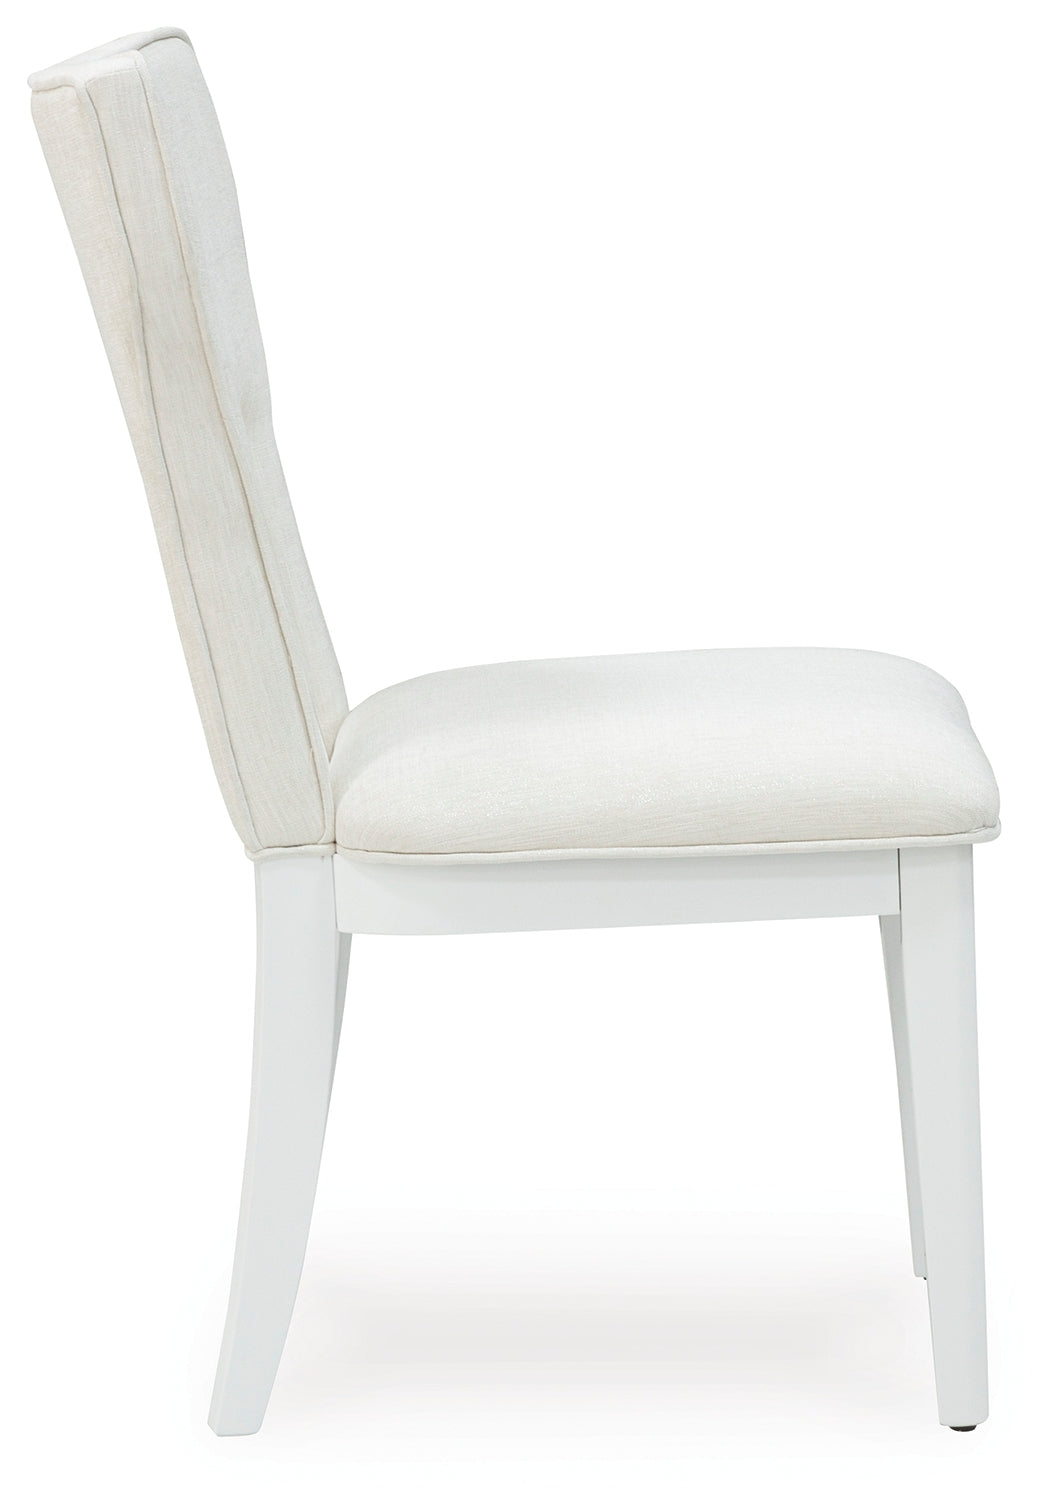 Chalanna White Dining Chair ( Set of 2)